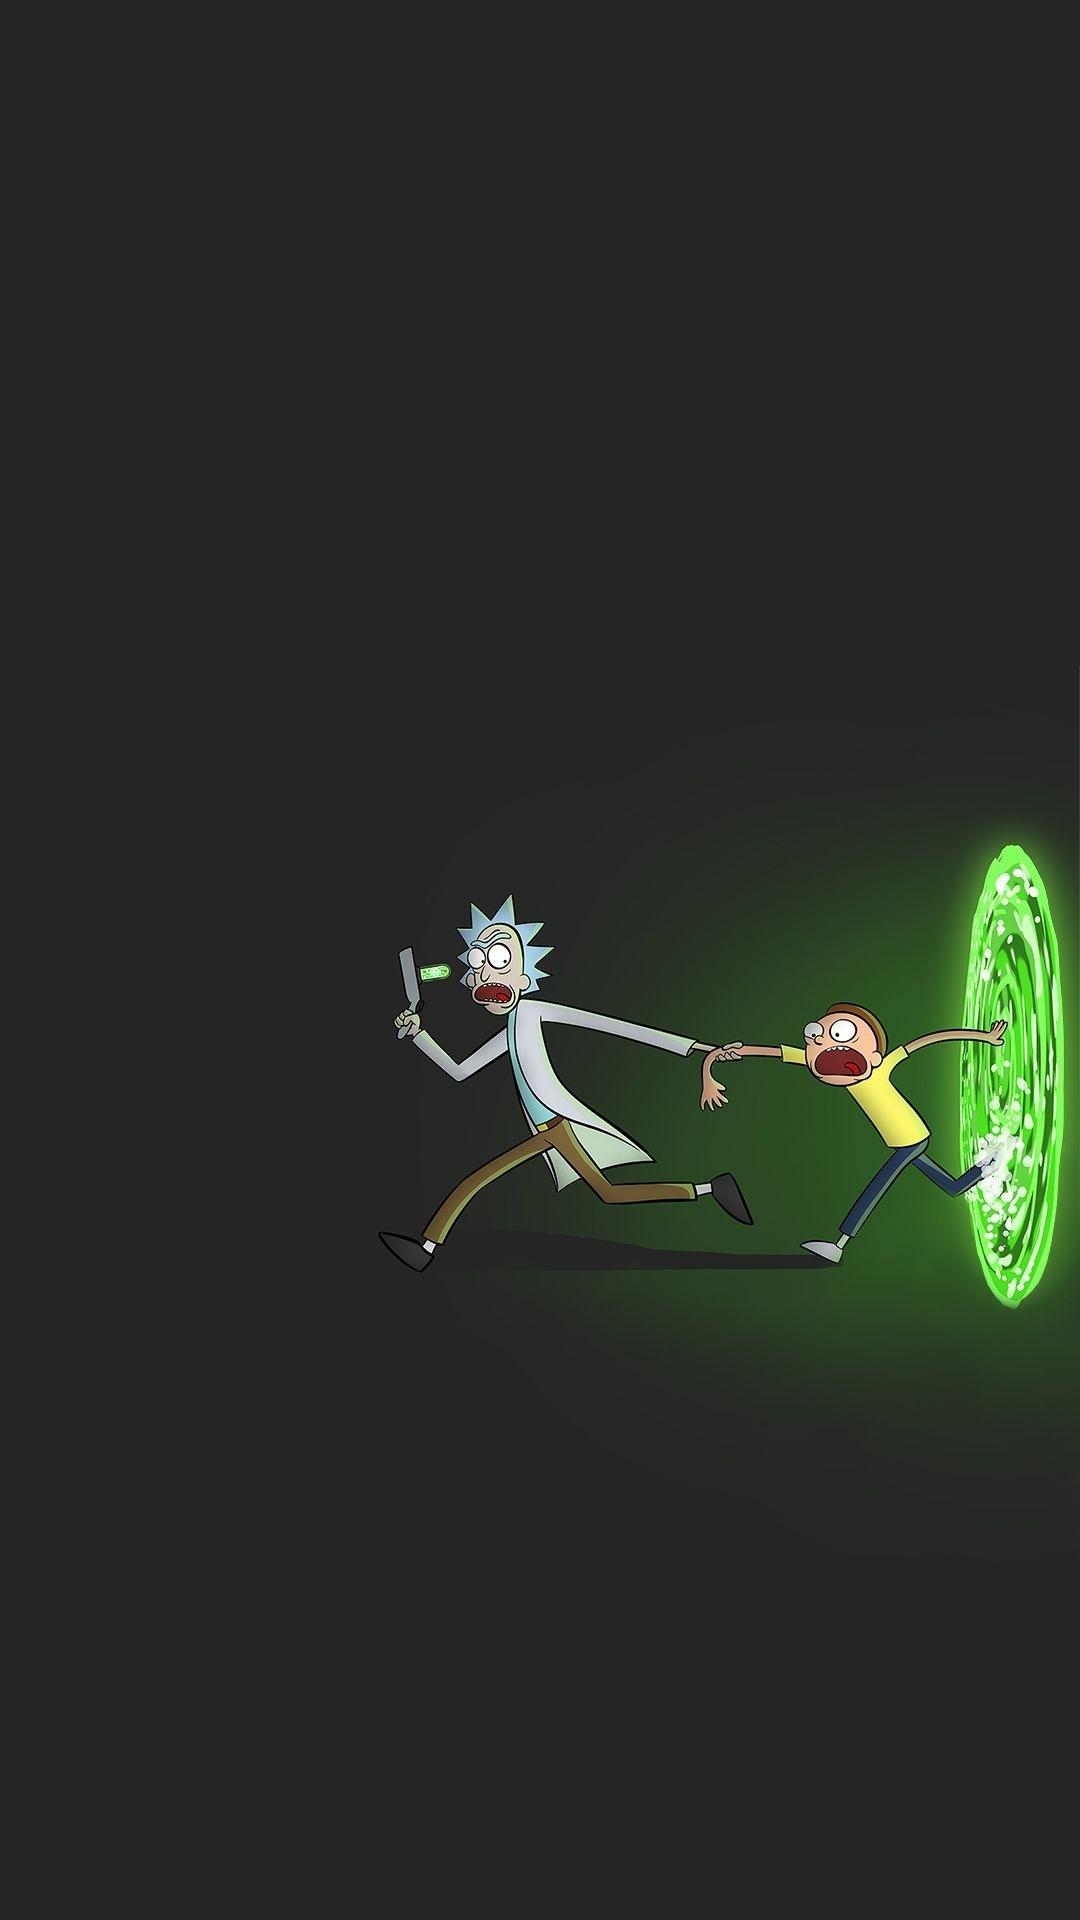 10 Best Rick And Morty Wallpapers Hd FULL HD 1080p For PC Backgrounds